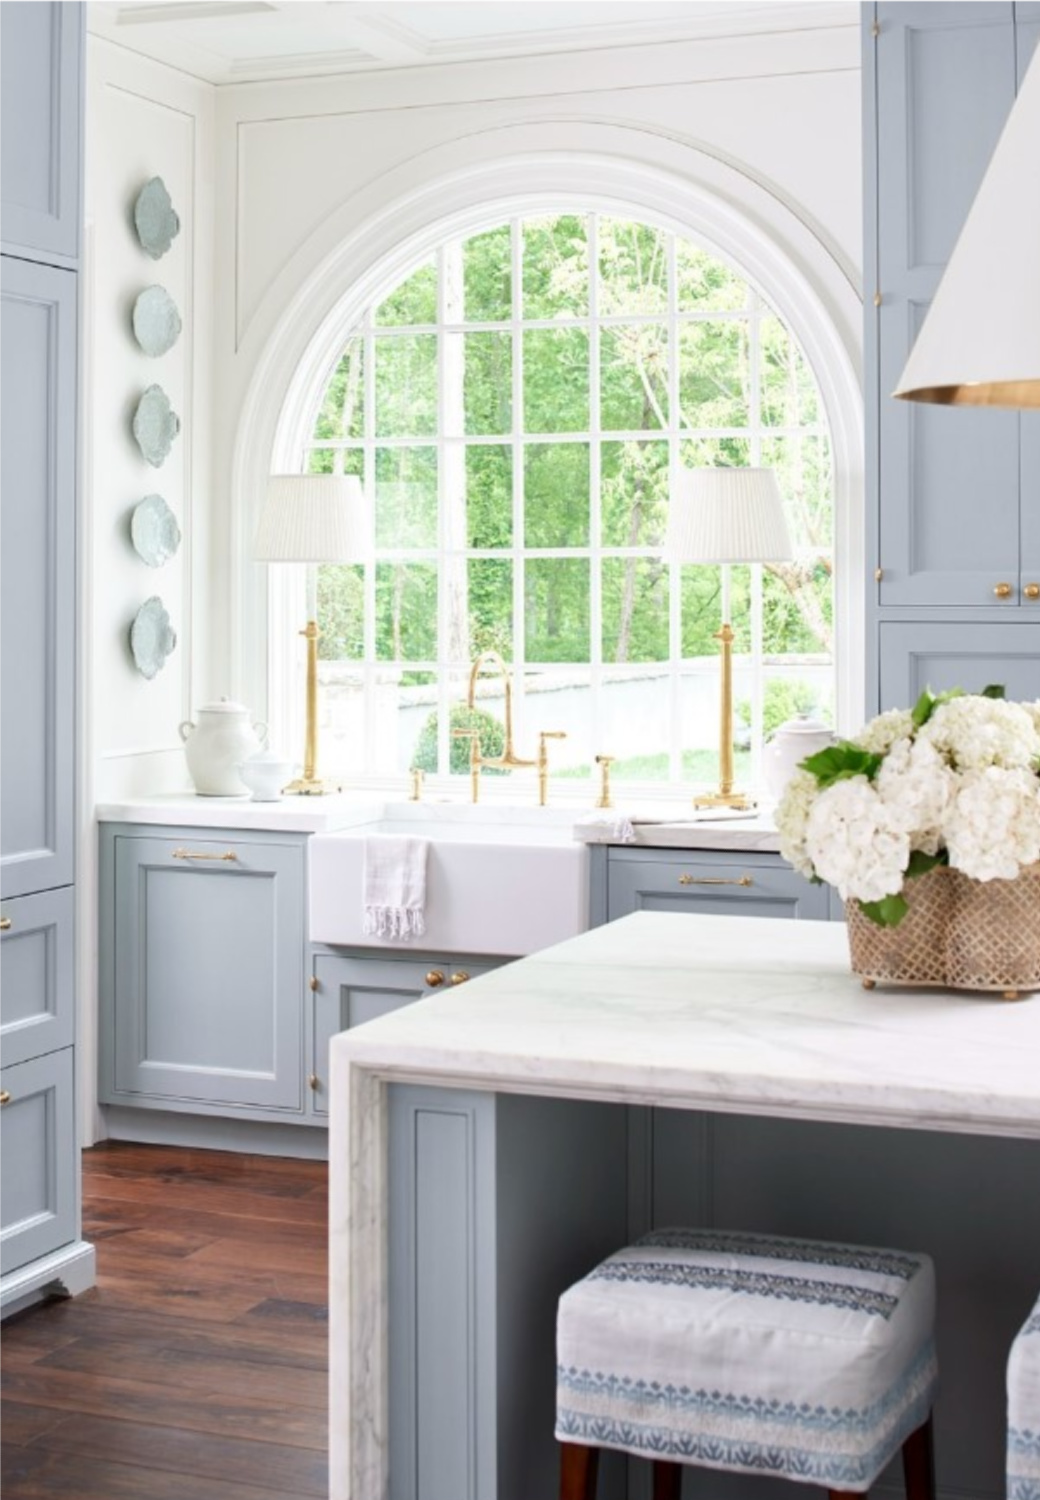 Farrow & Ball Light Blue kitchen cabinets in a traditional style kitchen by @laurendeloachinteriors. #farrowandballlightblue #bluekitchencabinets